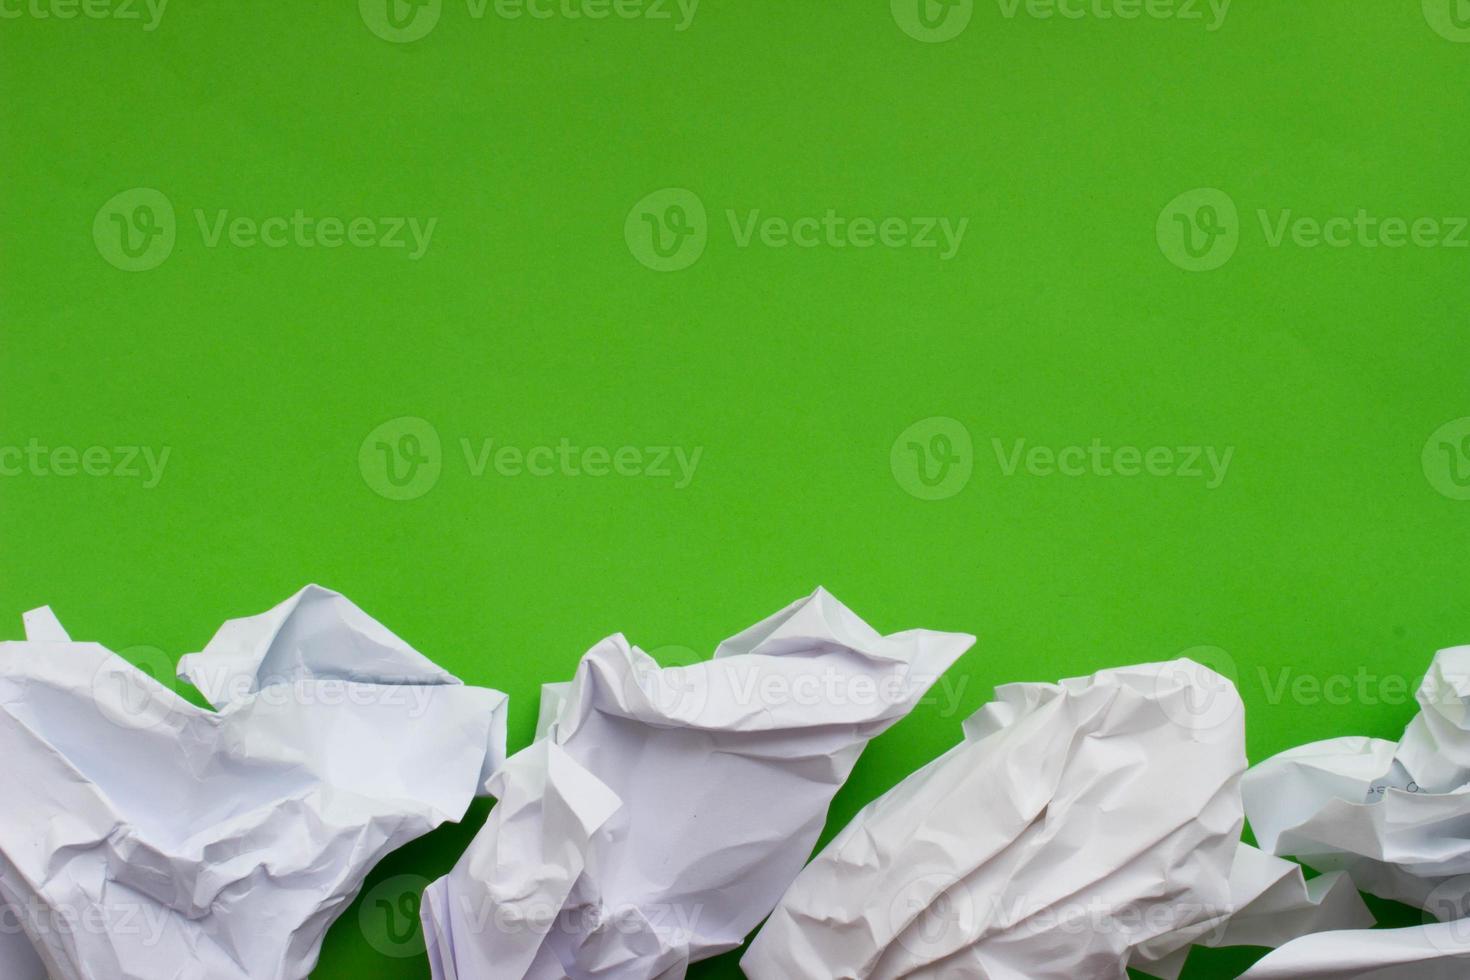 Crumpled paper on green background with place for your design photo